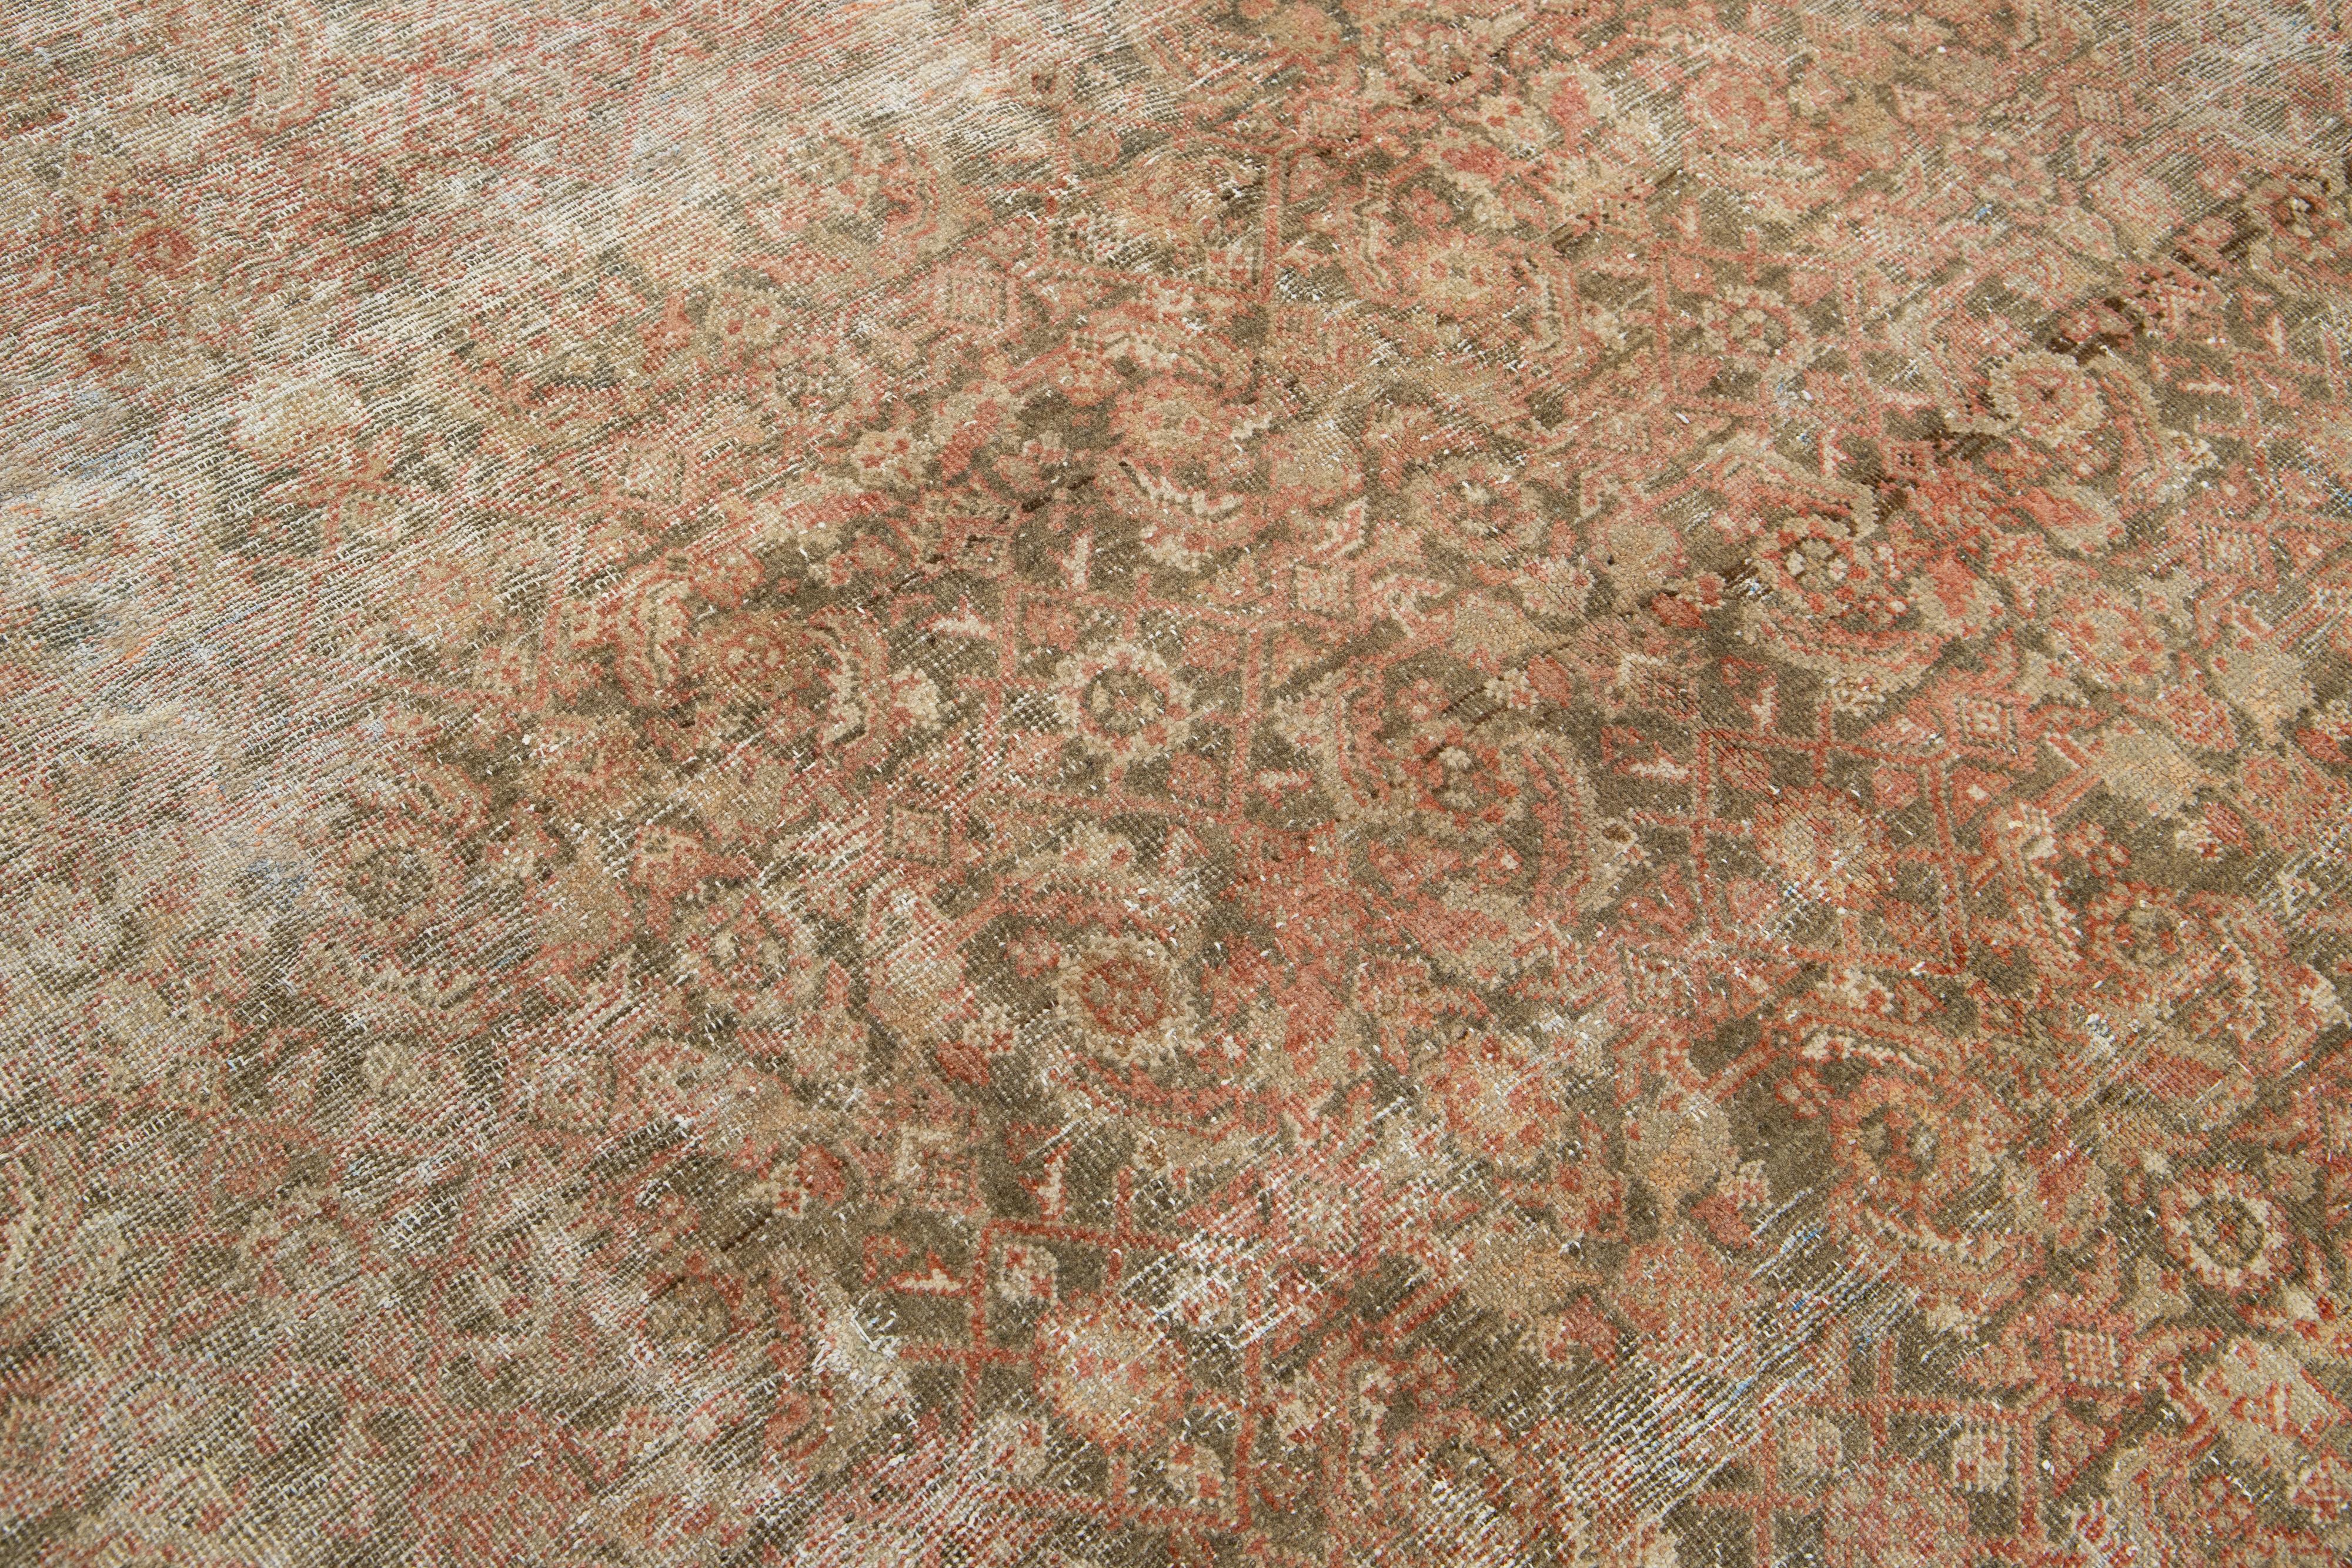 Antique Persian Tabriz Wool Rug with Rust Allover Design from the 1910s For Sale 2